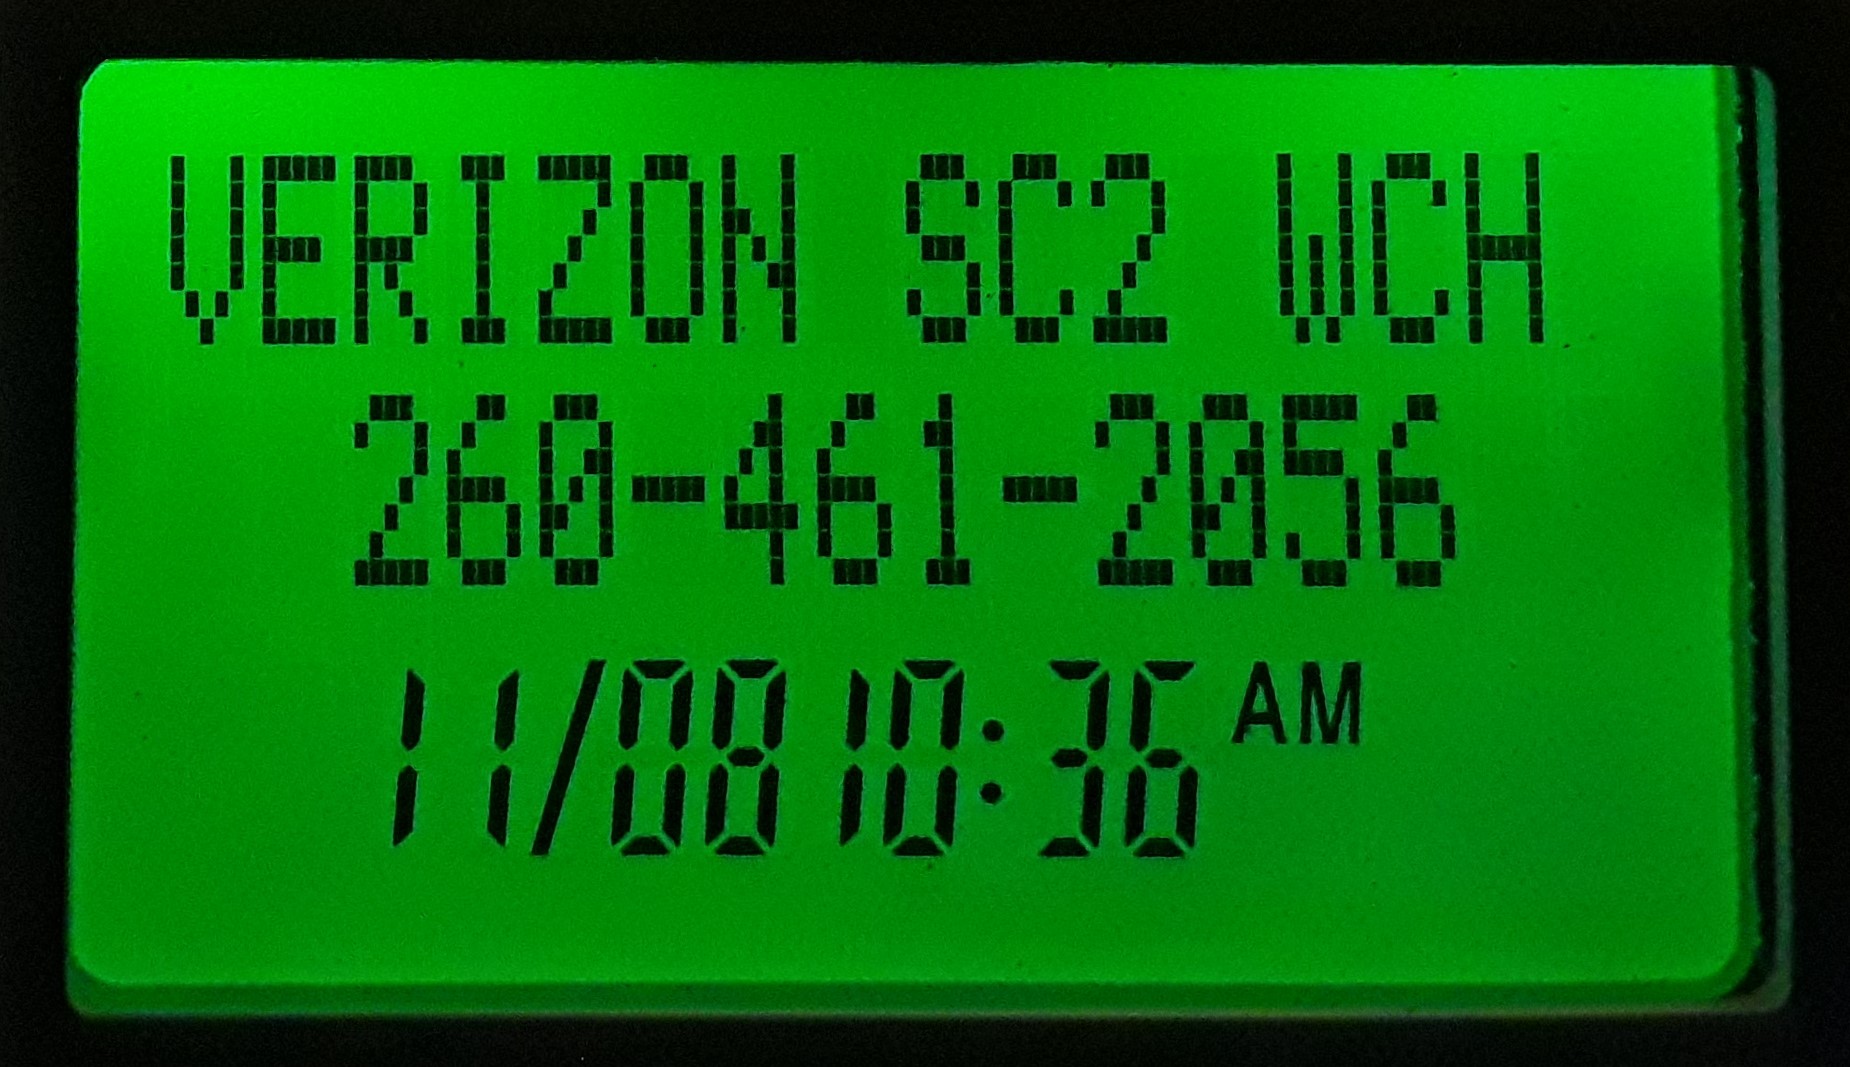 False caller ID on a call by Frontier Communications Corporation